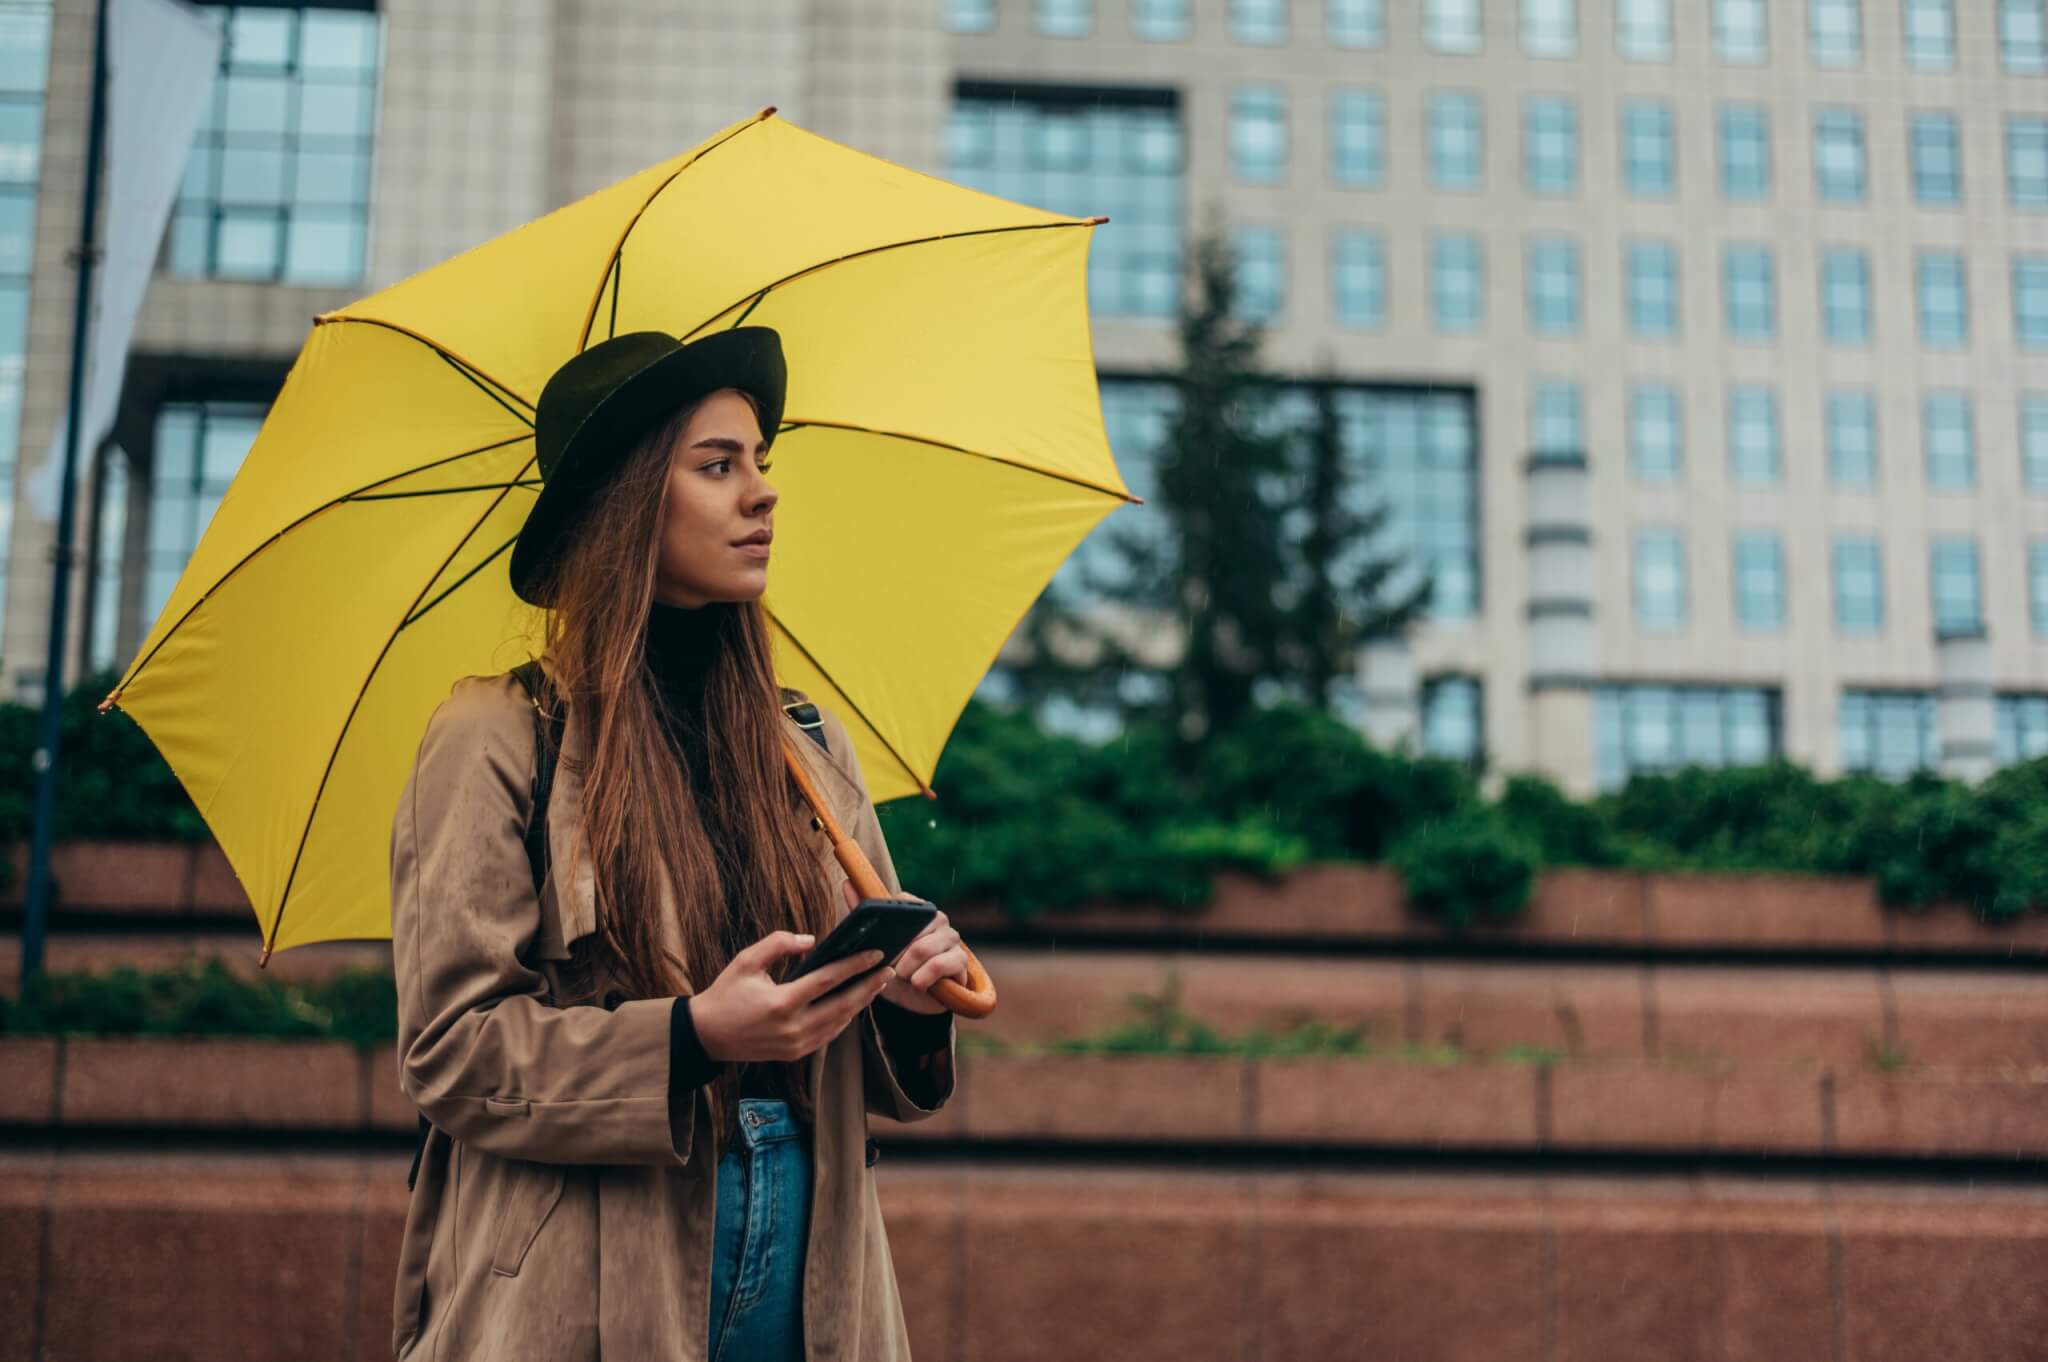 Woman looking at smartphone while holding umbrella